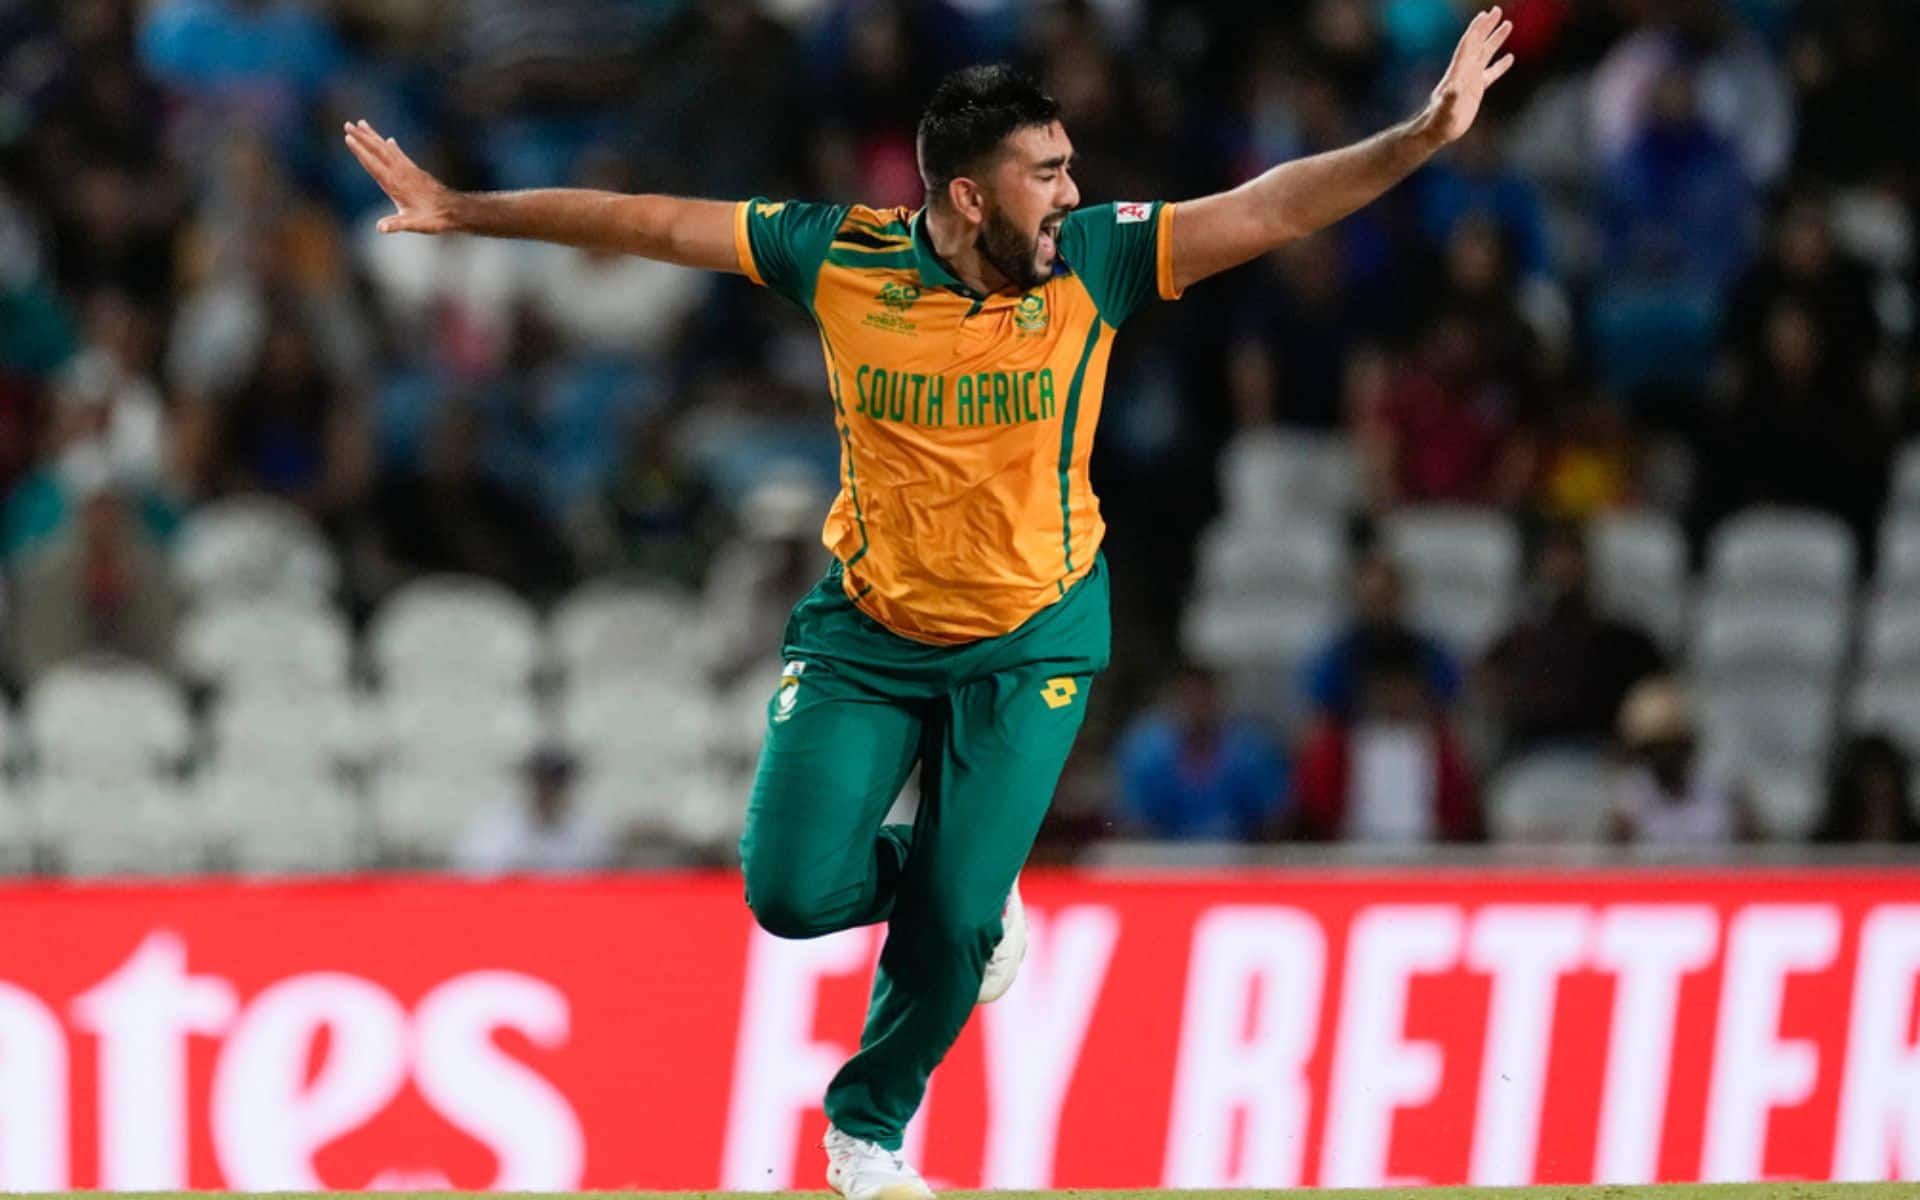 Tabraiz Shamsi will be key for South Africa in the game [AP Photos]